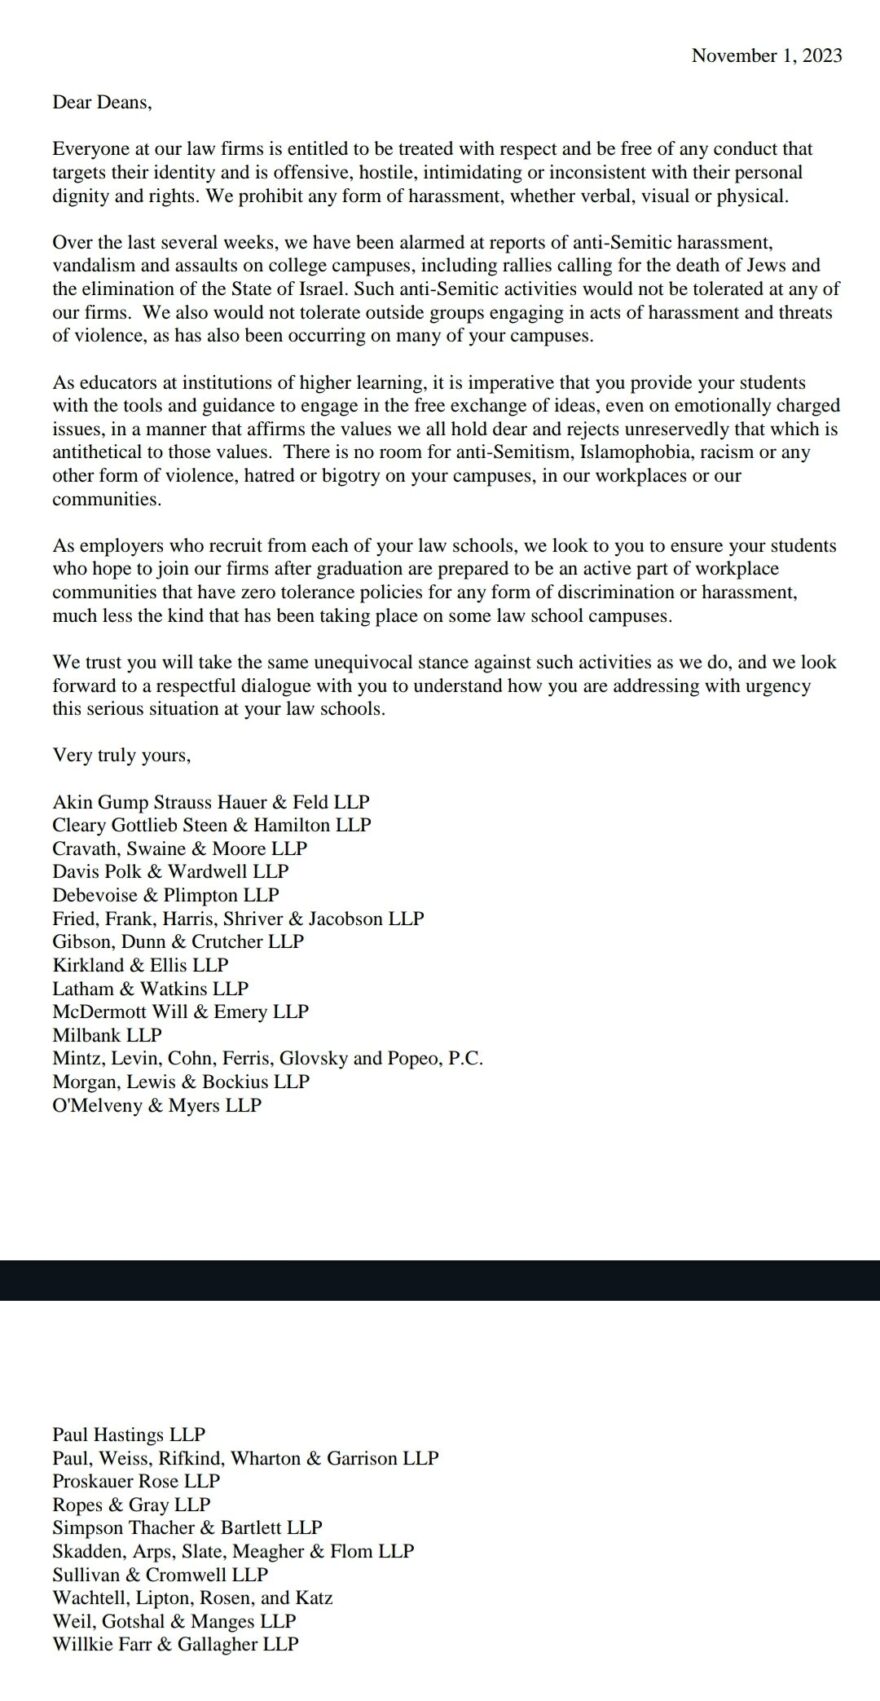 largest law firms-Letter to Deans